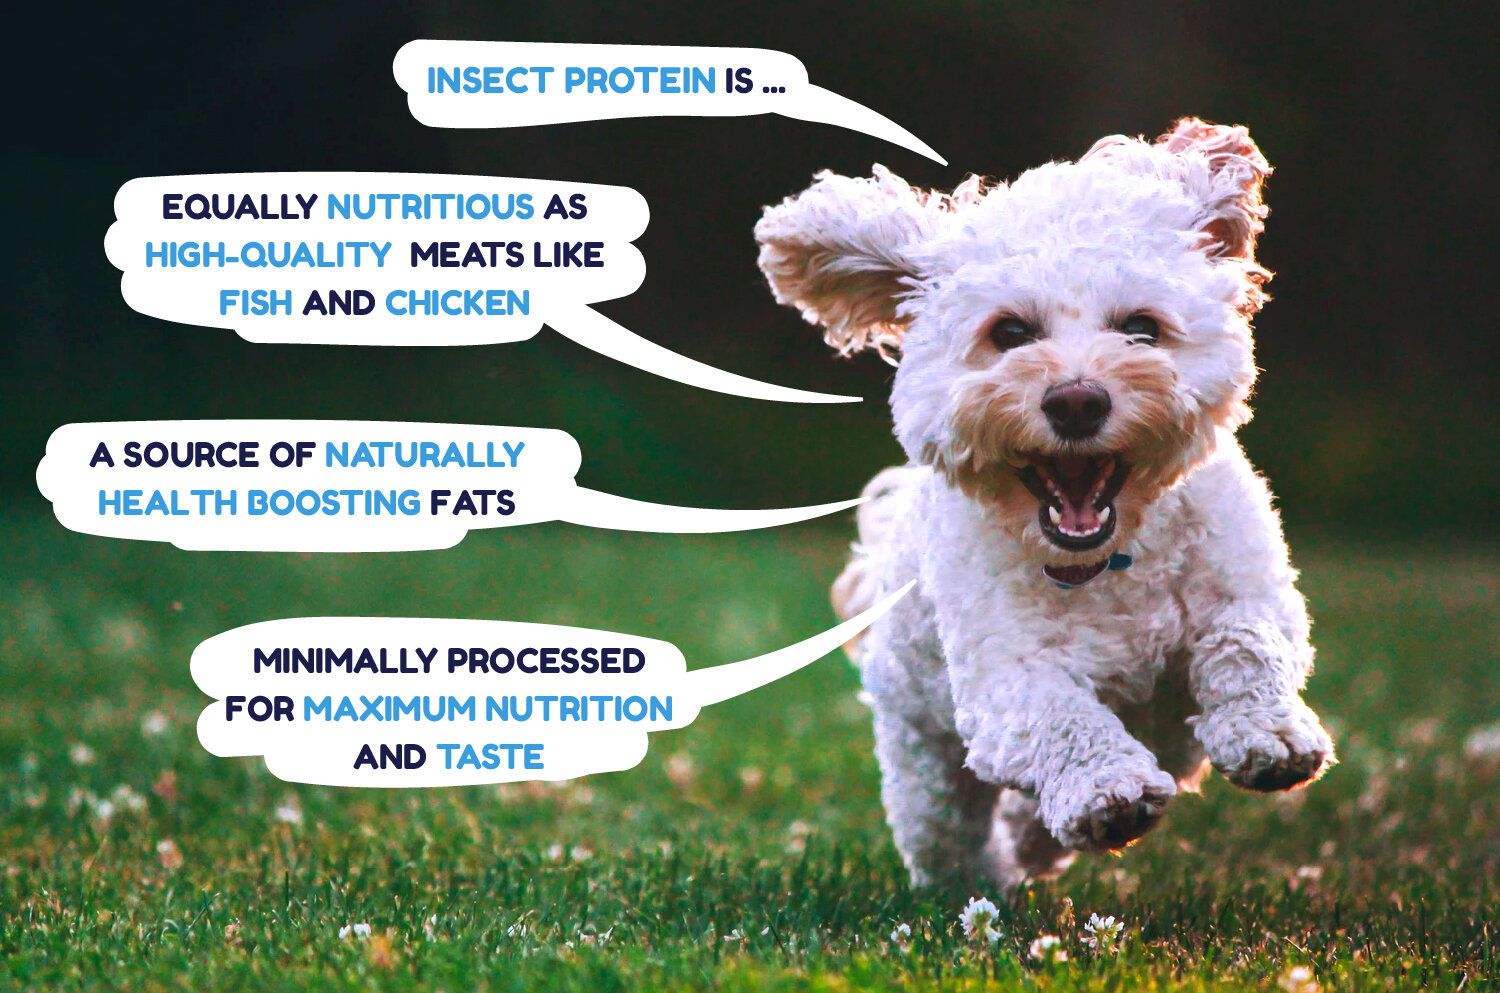 Banner advertisement for One with Everything insect protein bites featuring an image of a canine and the product benefits.